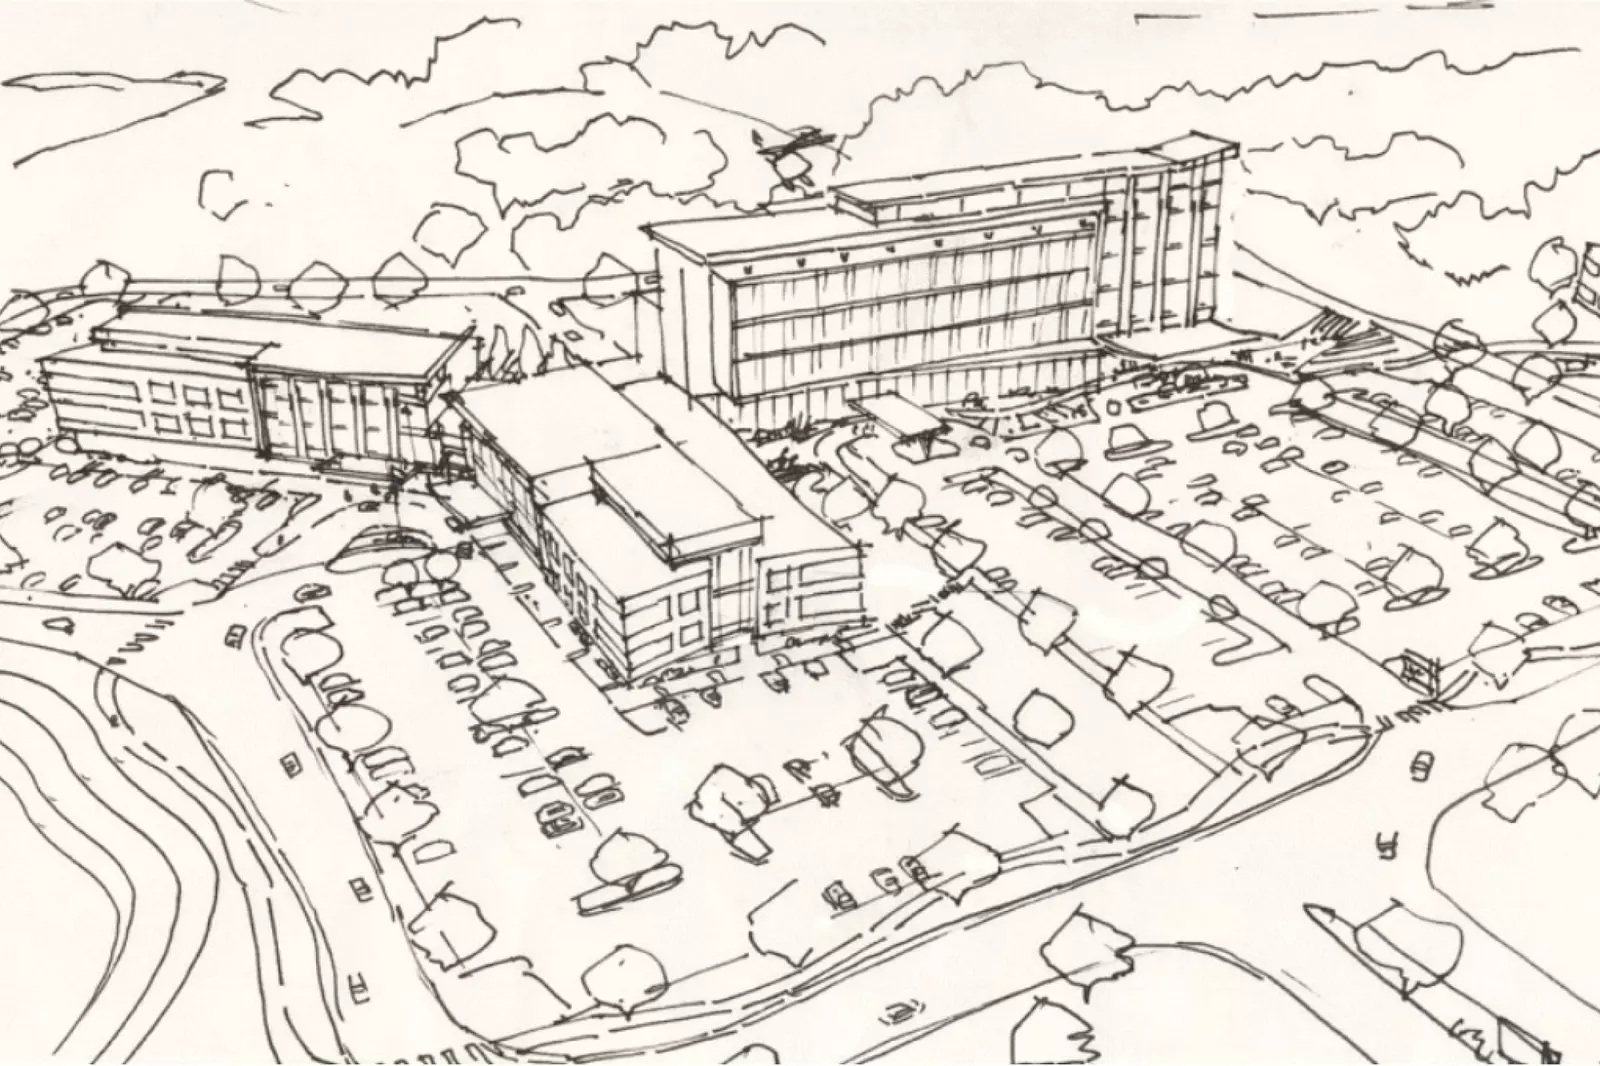 Pen and ink drawing of future AdventHealth Asheville